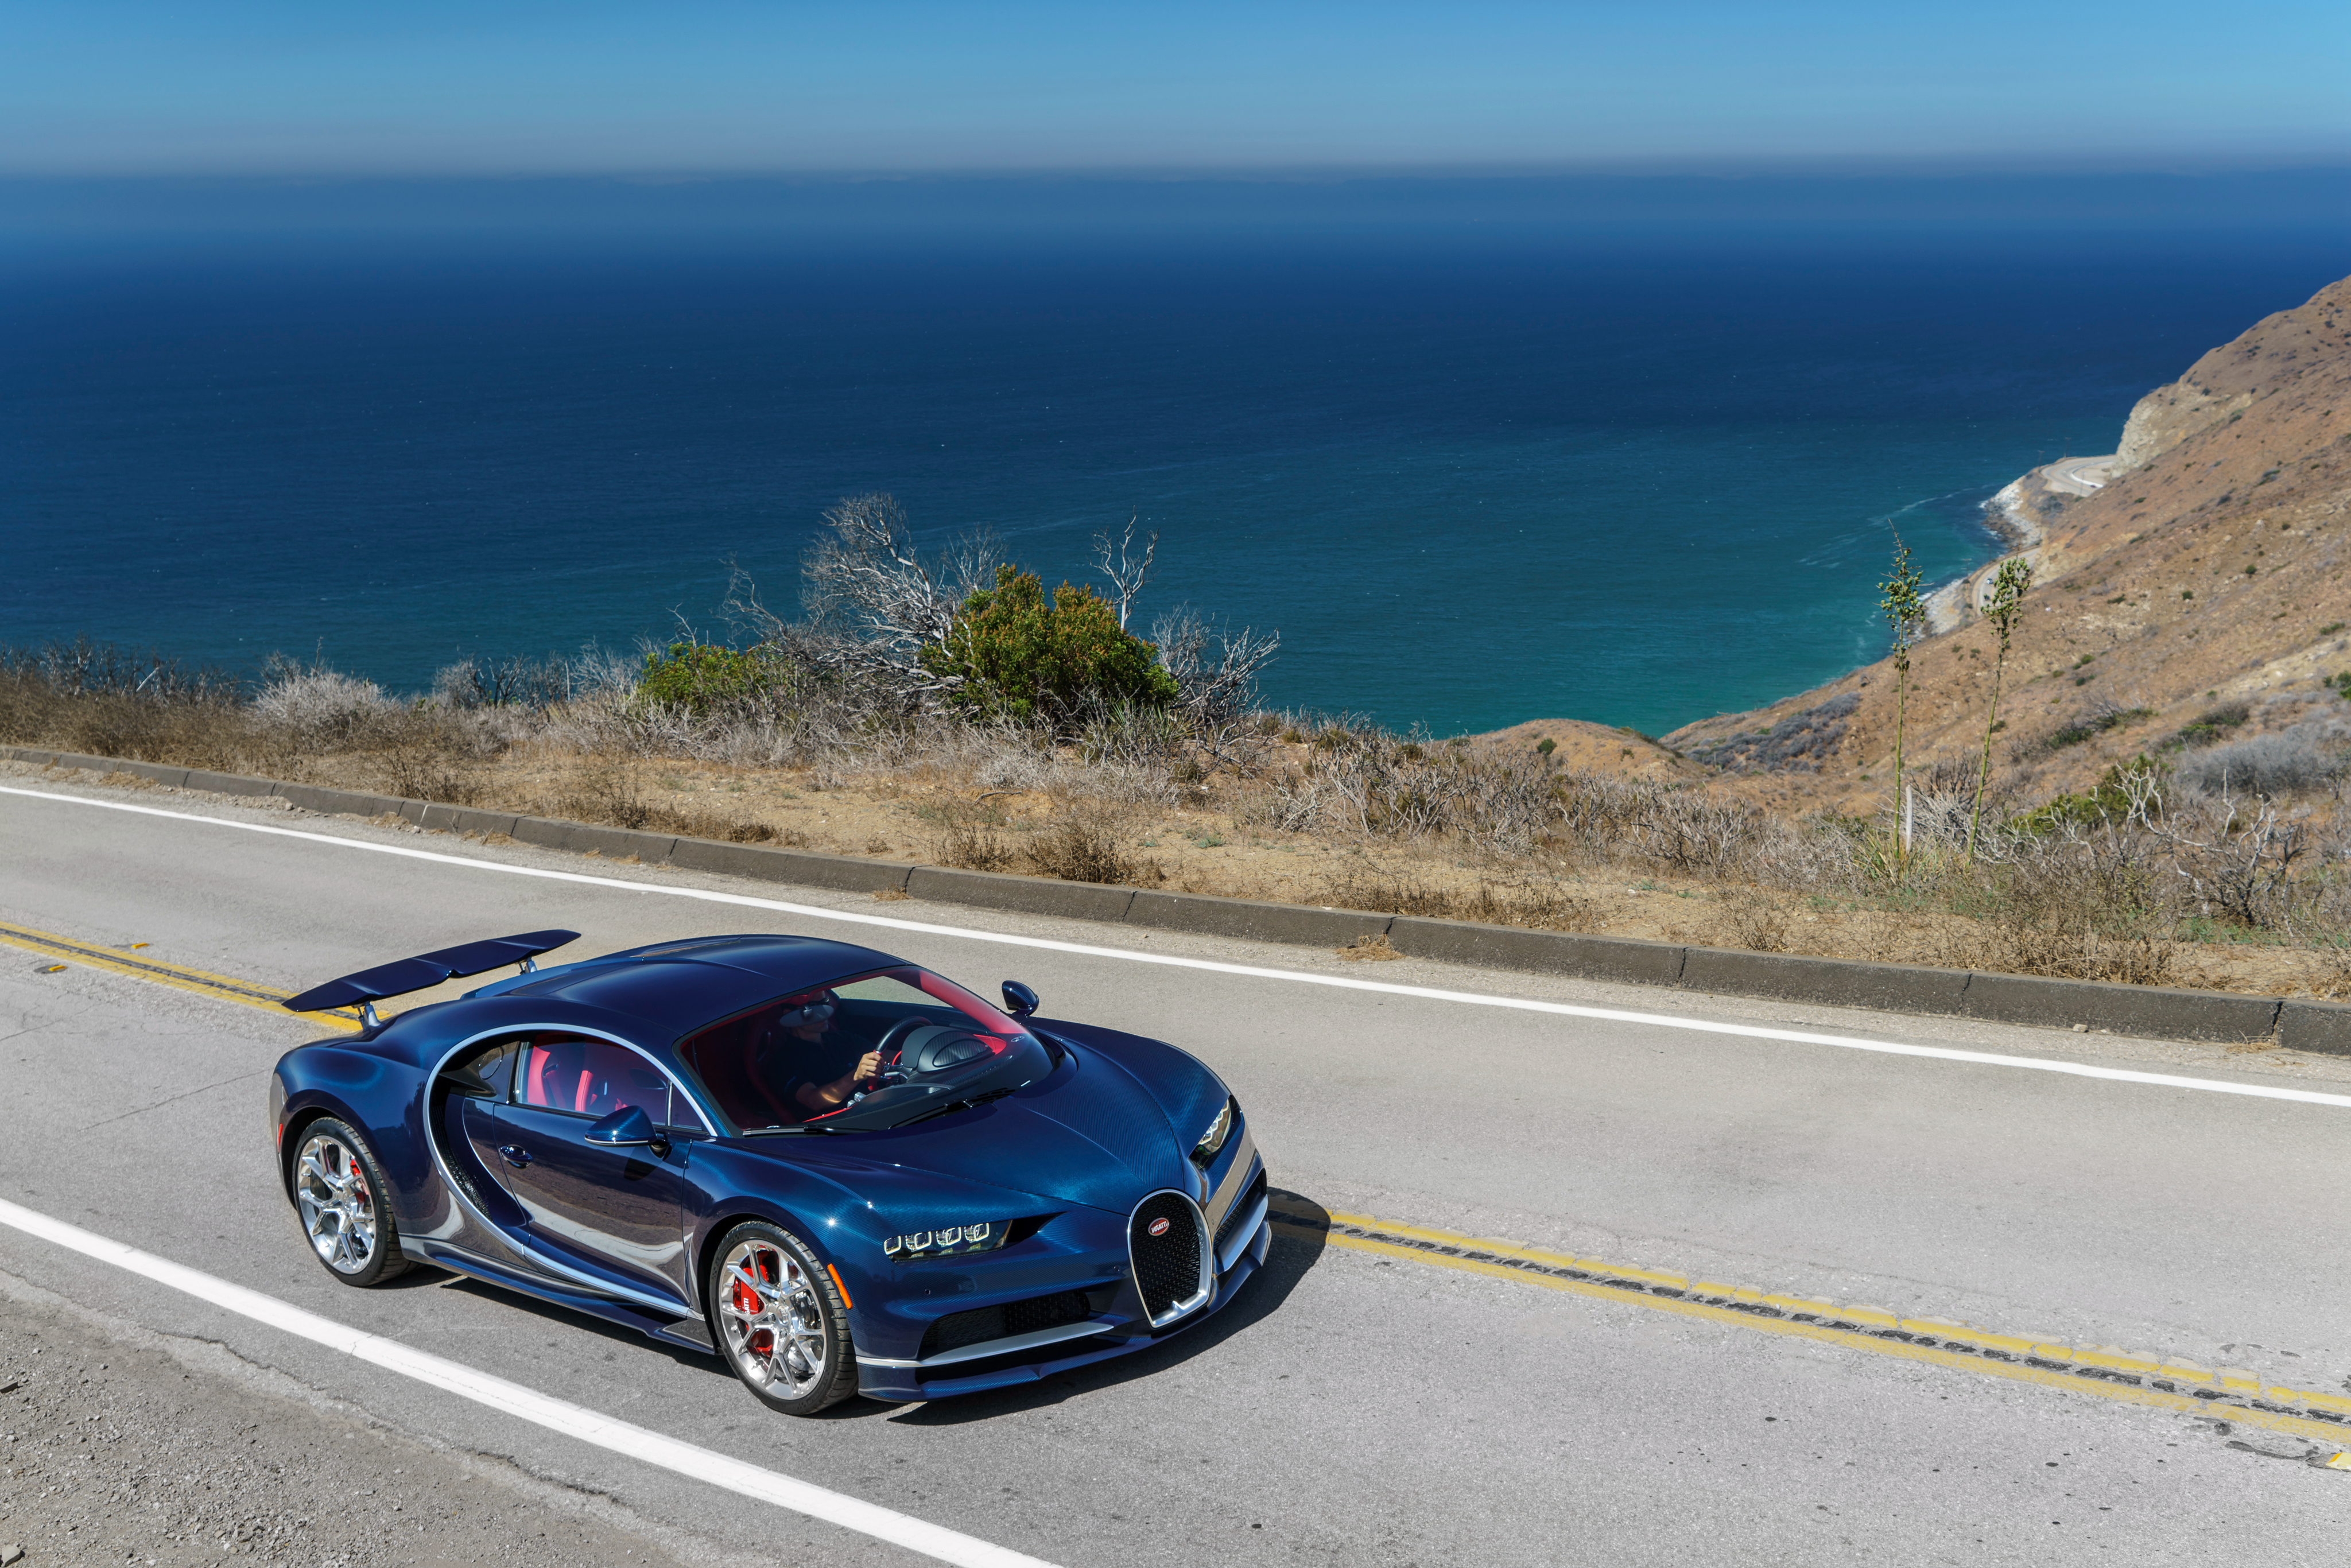 94596 download wallpaper bugatti, cars, blue, side view, chiron screensavers and pictures for free